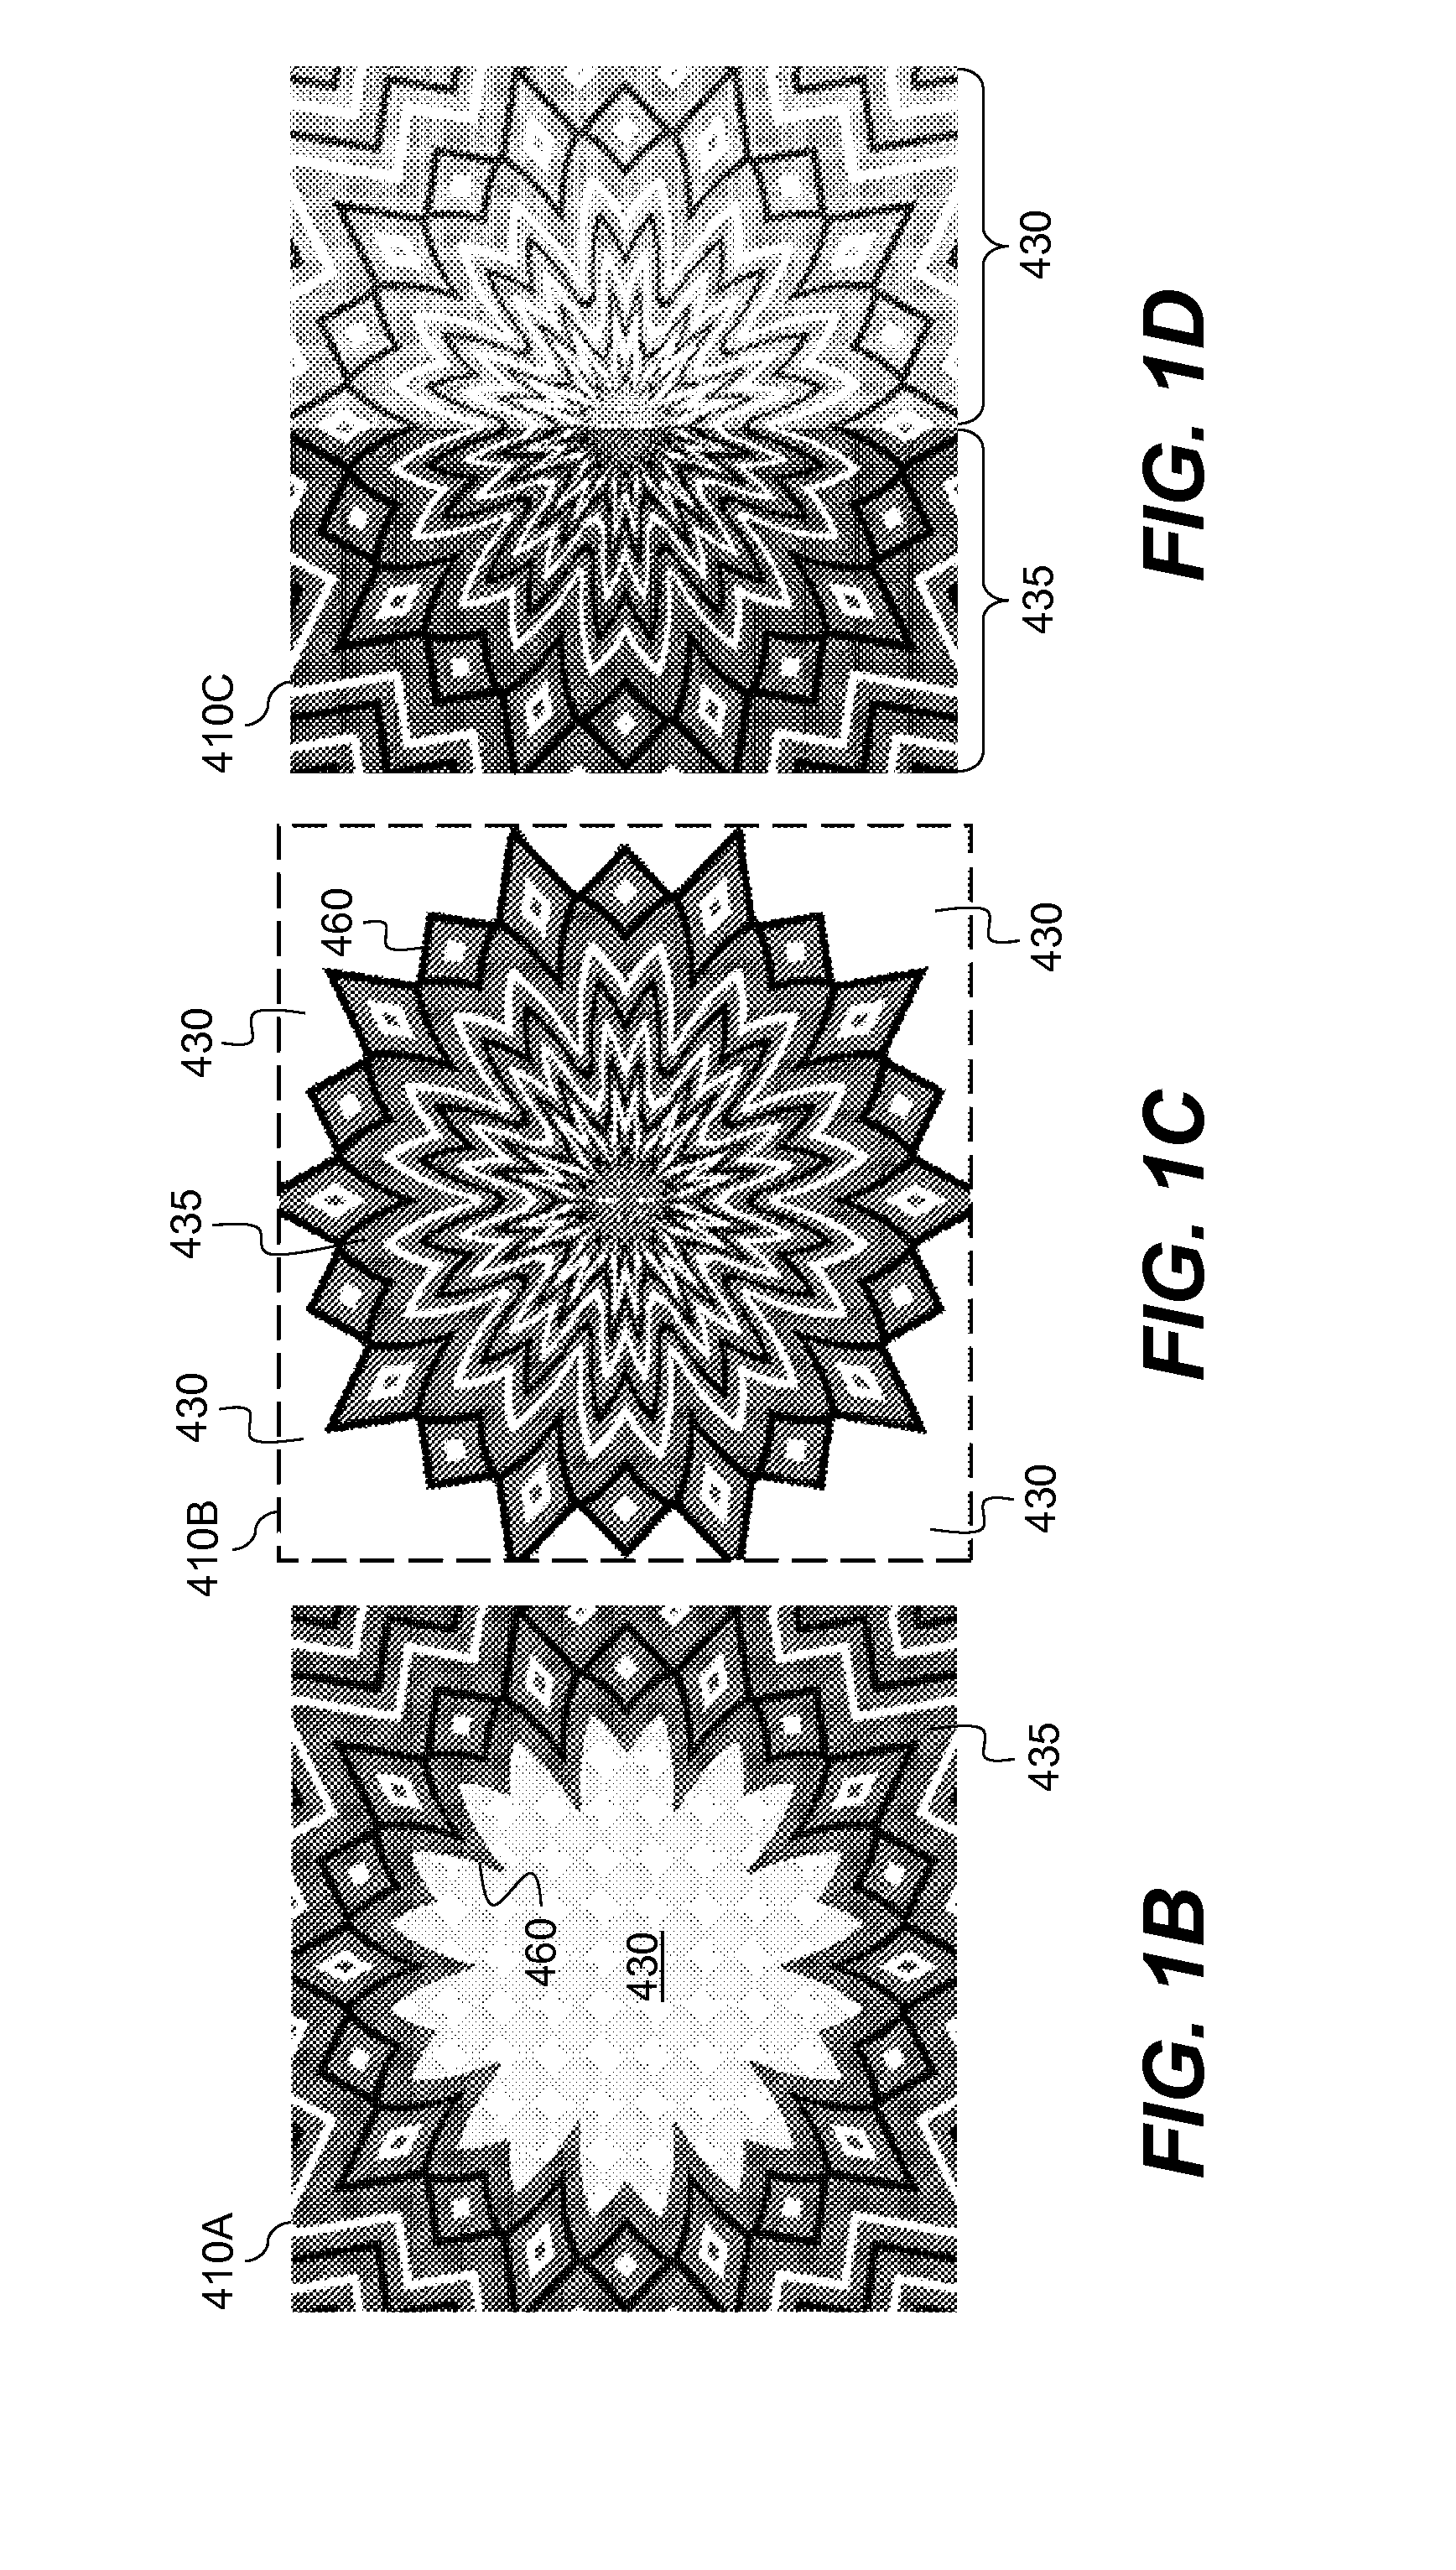 System for controlling dynamic optical illusion images